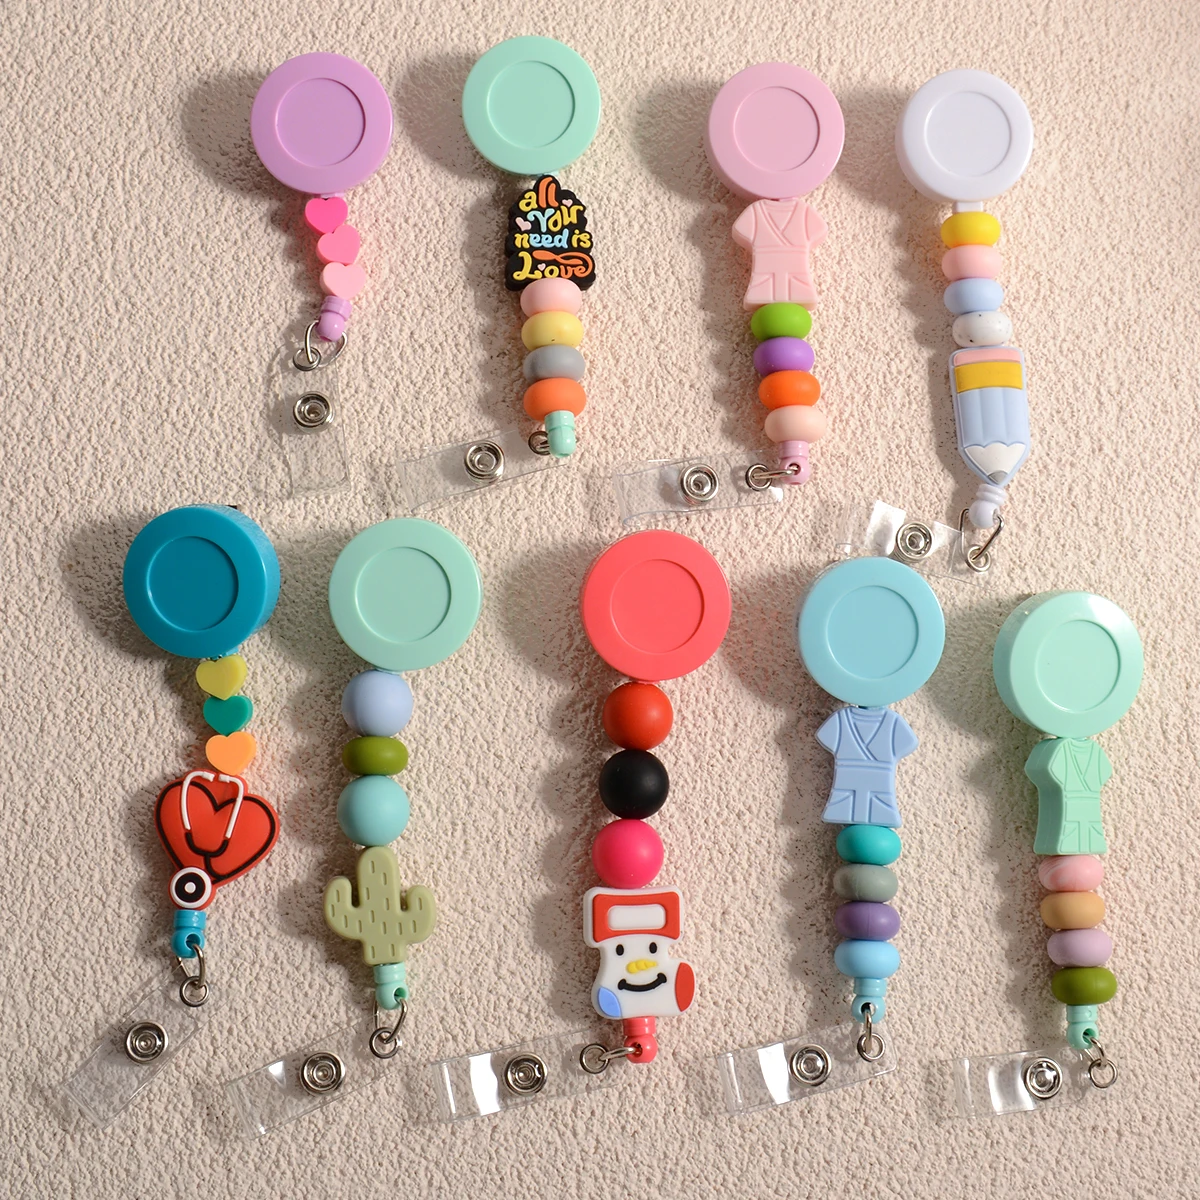 Retractable Silicone Beads Badge Reels BBS Cute Heart Nurse Id Badge Holders with Alligator CliP for Nursing Teachers Office hospital retractable badge reel with belt clip cute bottle nurse doctor name tag card holder accessories office supply clip